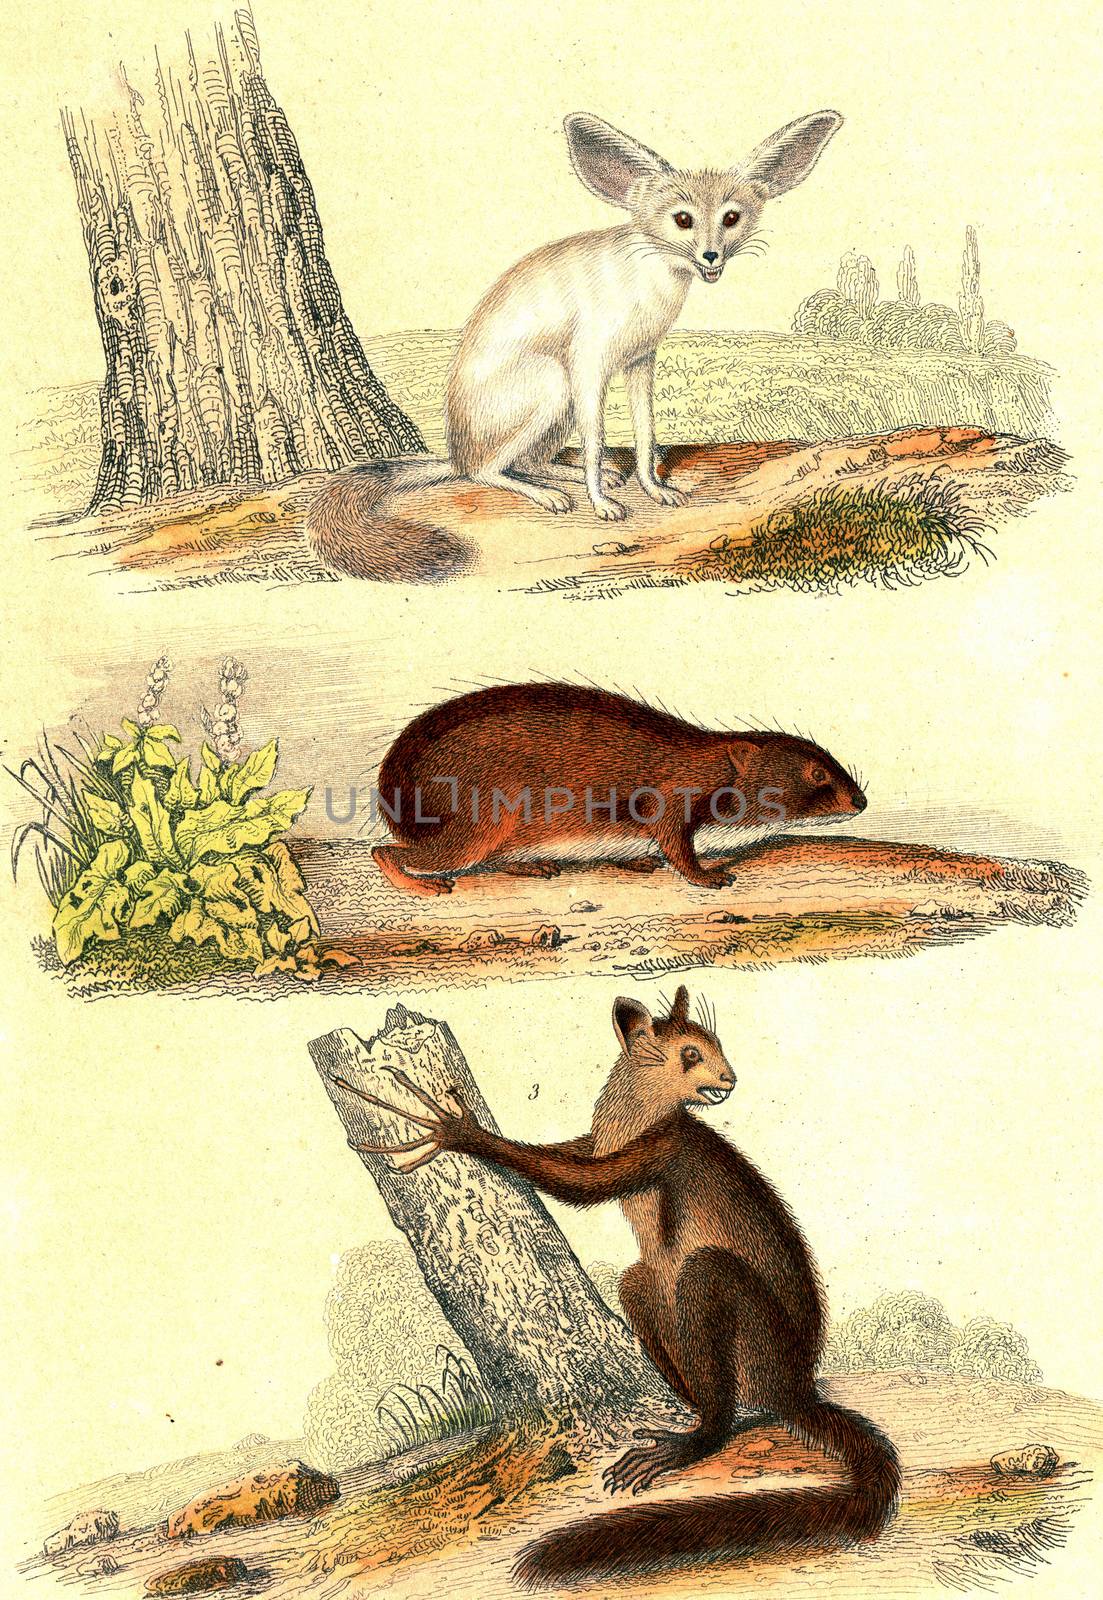 Fennec fox, The Guinea pig, Aye-aye, vintage engraved illustration. From Buffon Complete Work.
